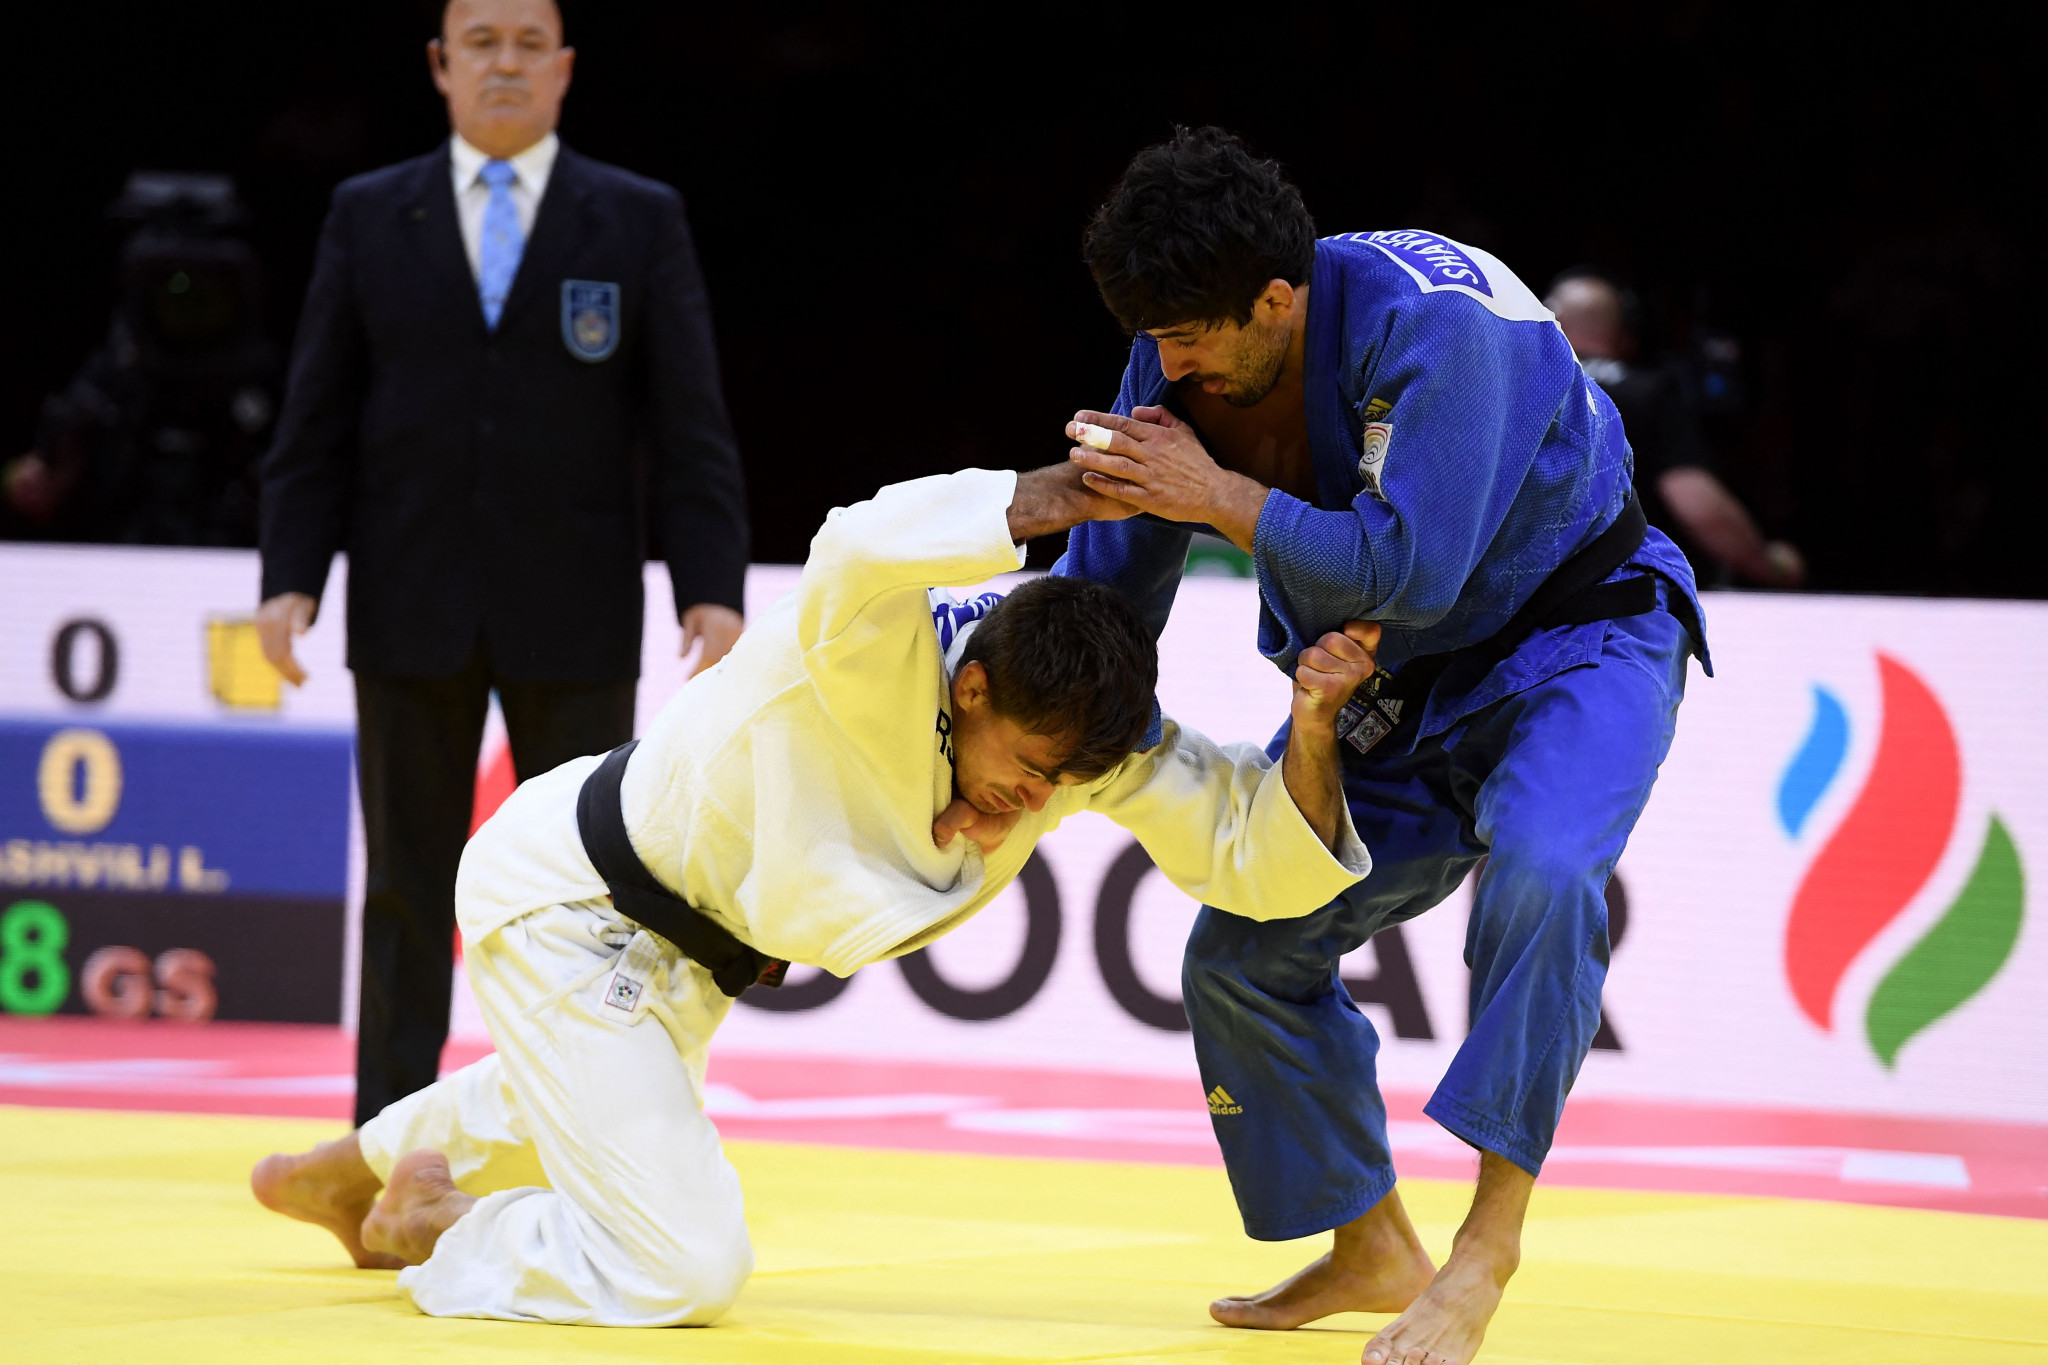 Shavdatuashvilim right, battles with Tommy Macias for the gold medal ©Getty Images